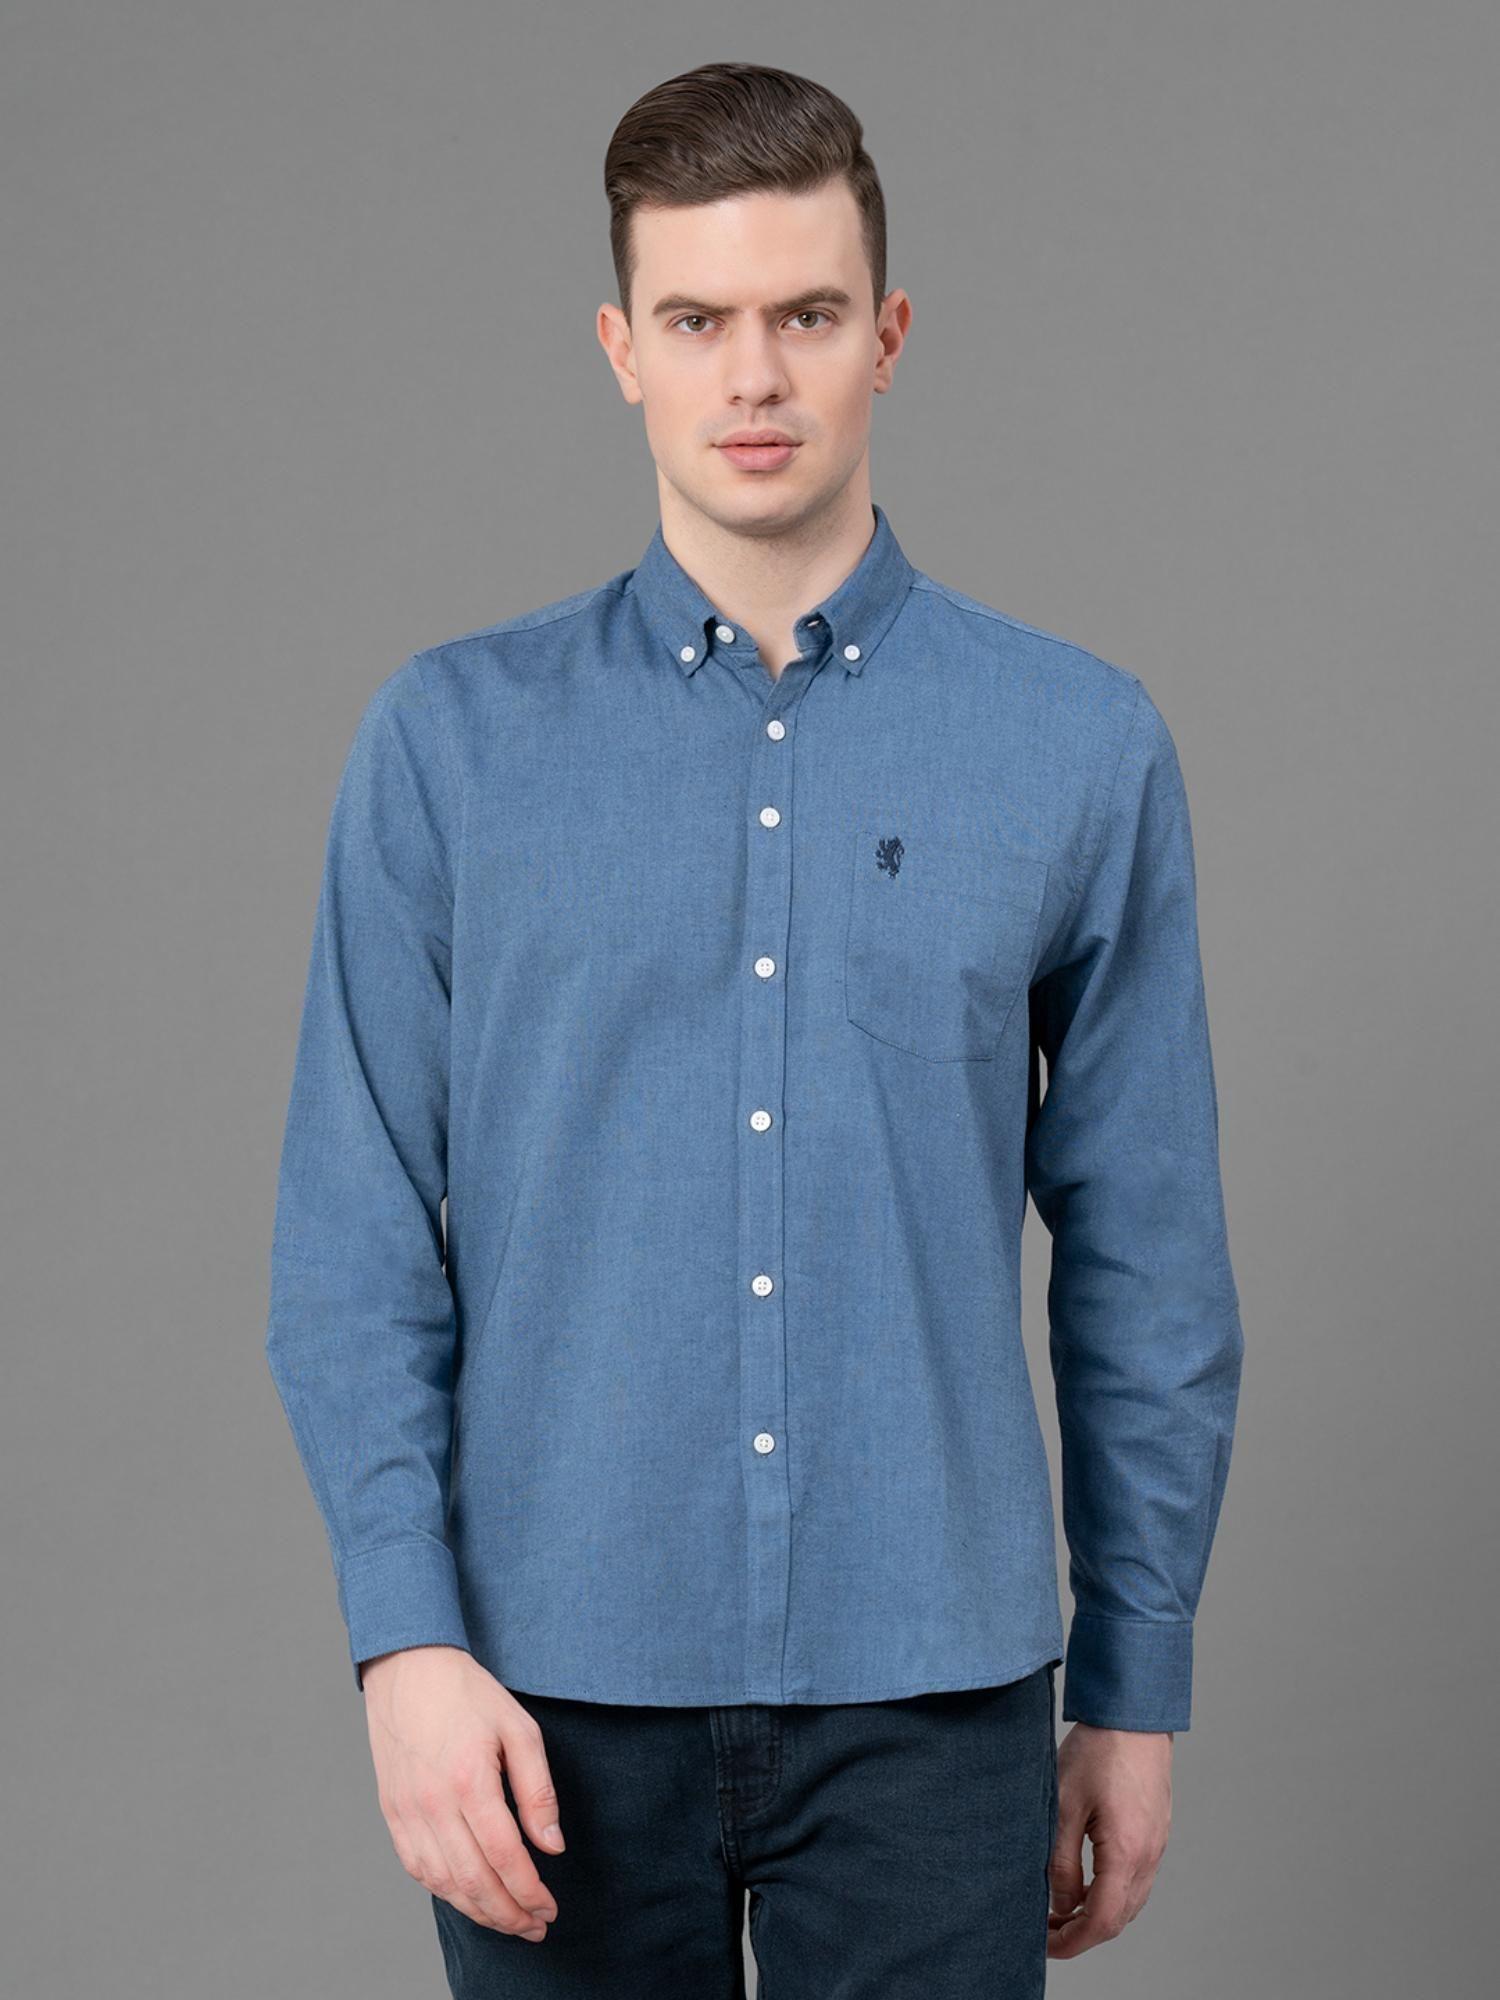 cool blue pure cotton oxford solid mens shirt